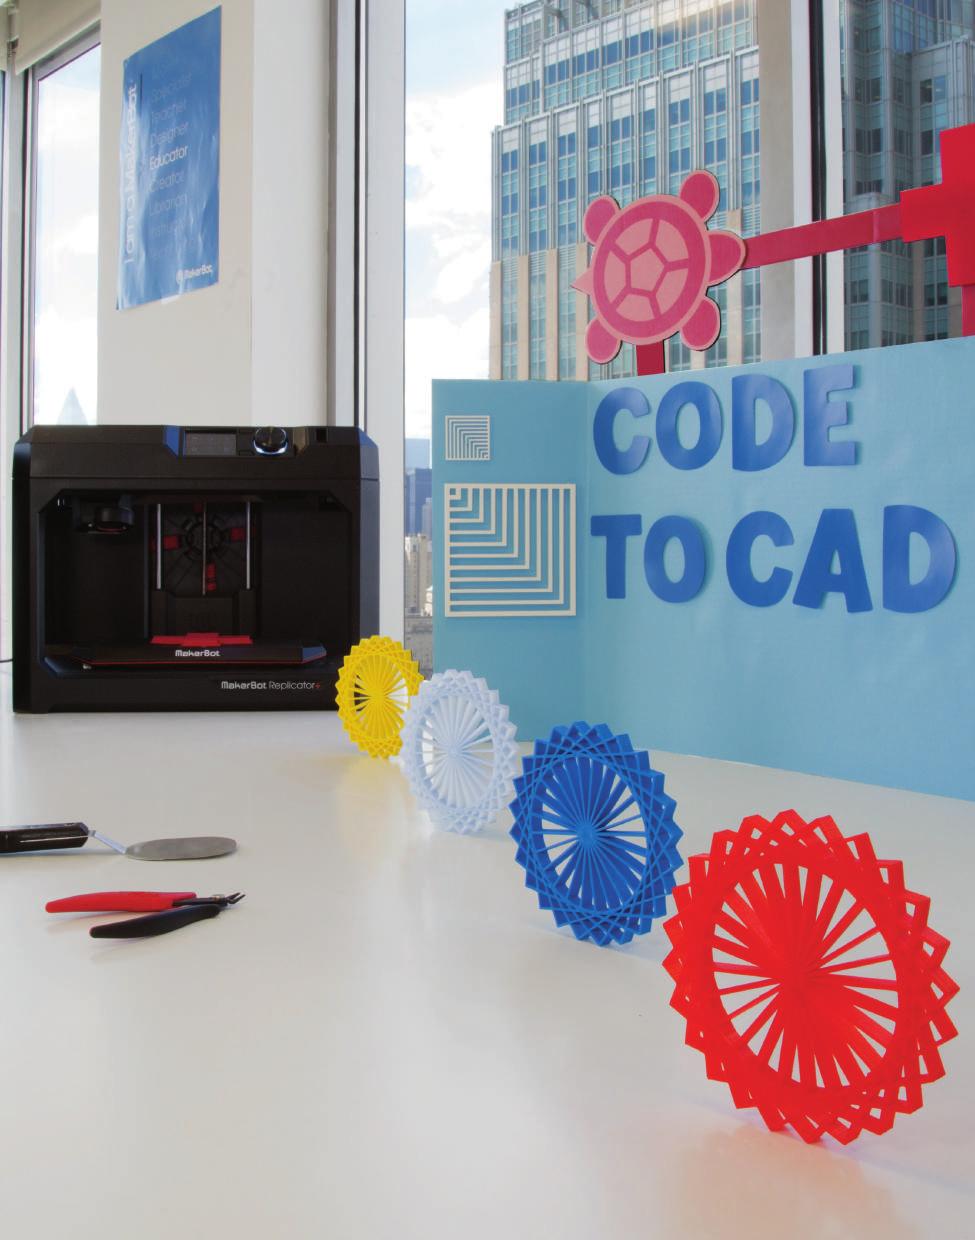 MAKERBOT EDUCATORS GUIDEBOOK PROJECT 03: CODE TO CAD PROJECT THREE GO FROM CODE TO CAD PAGE 68 LINK: